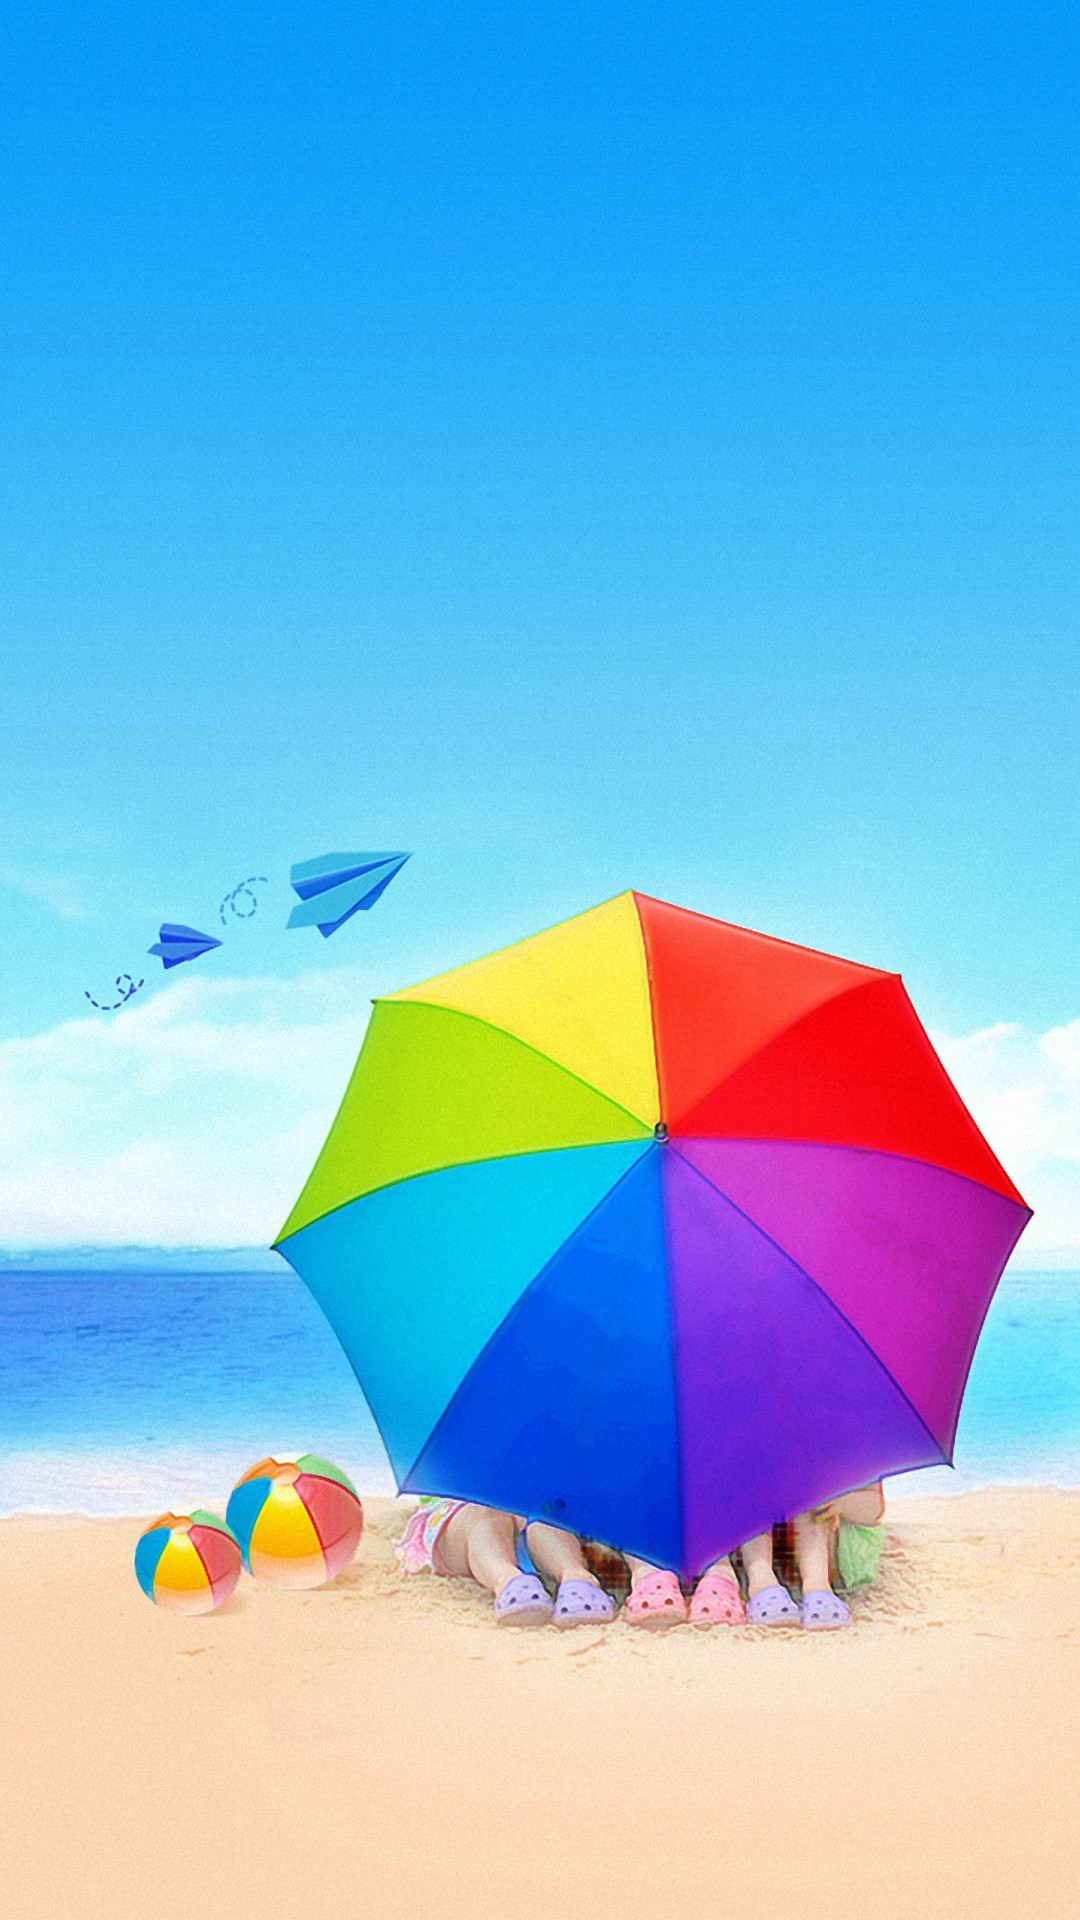 Best Wallpaper For Android Phone with HD resolution 1080x1920